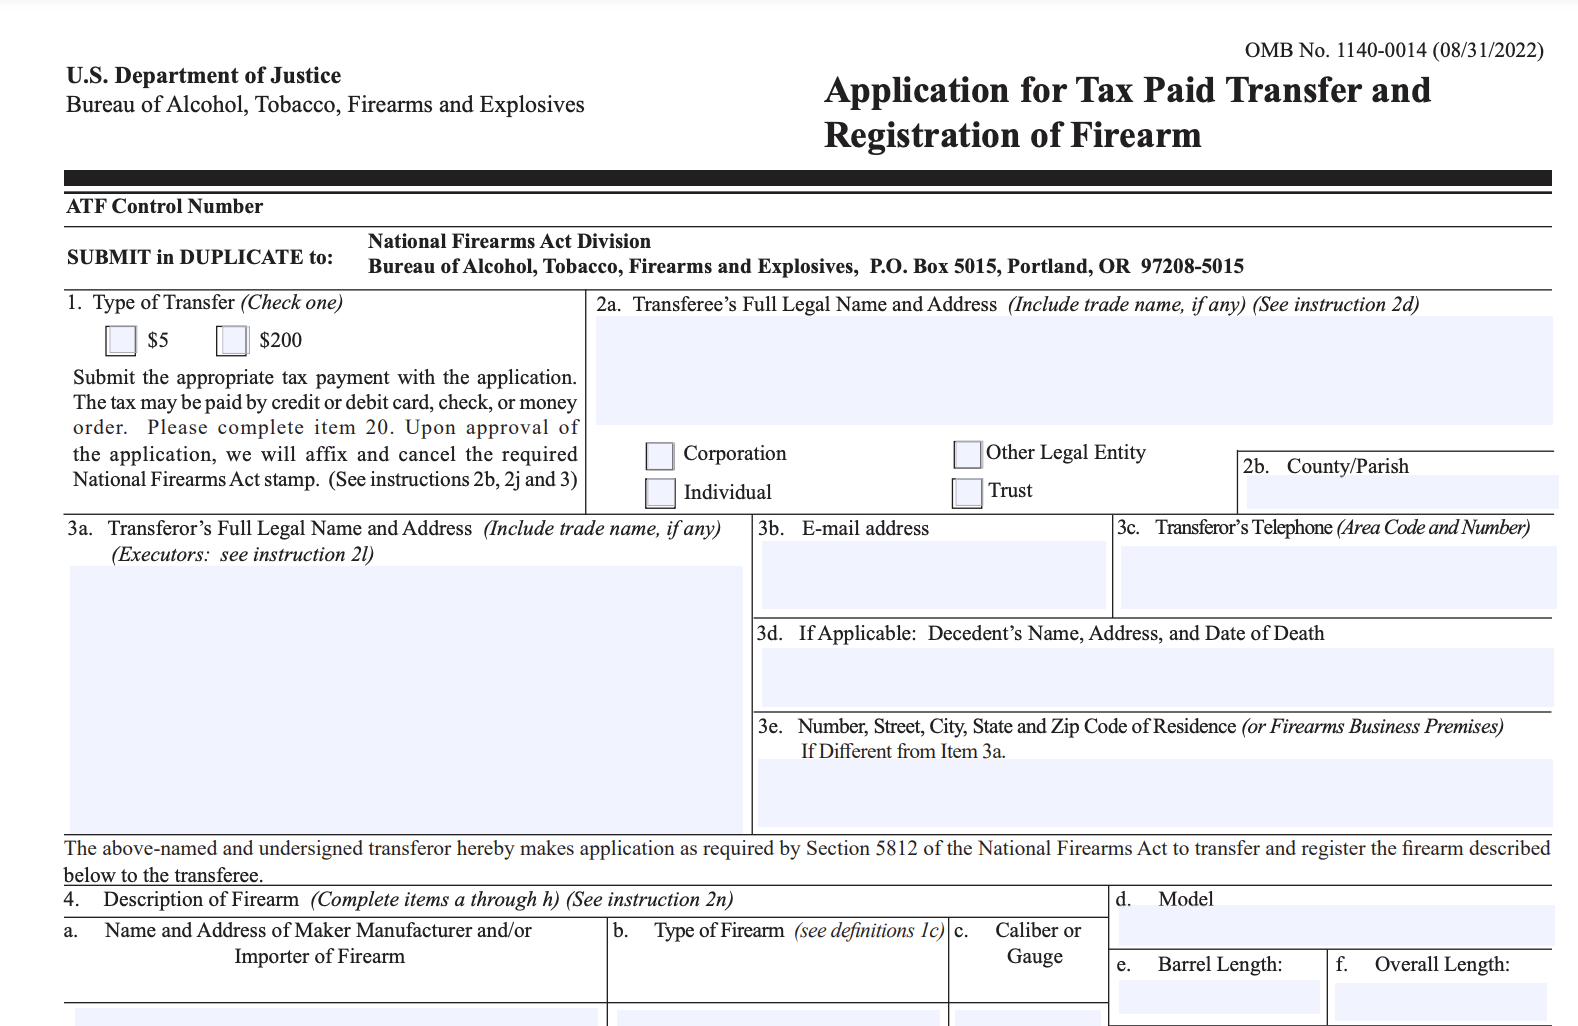 US Department of Justice Form 4.